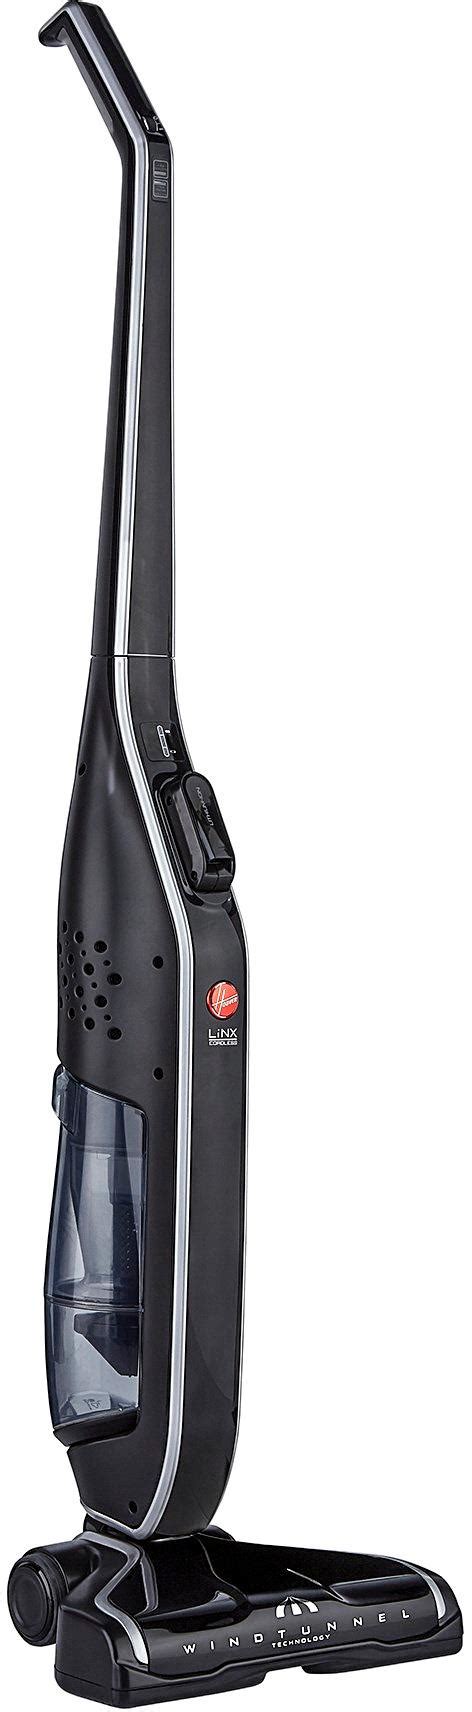 Questions And Answers Hoover Linx Signature Cordless Stick Vacuum